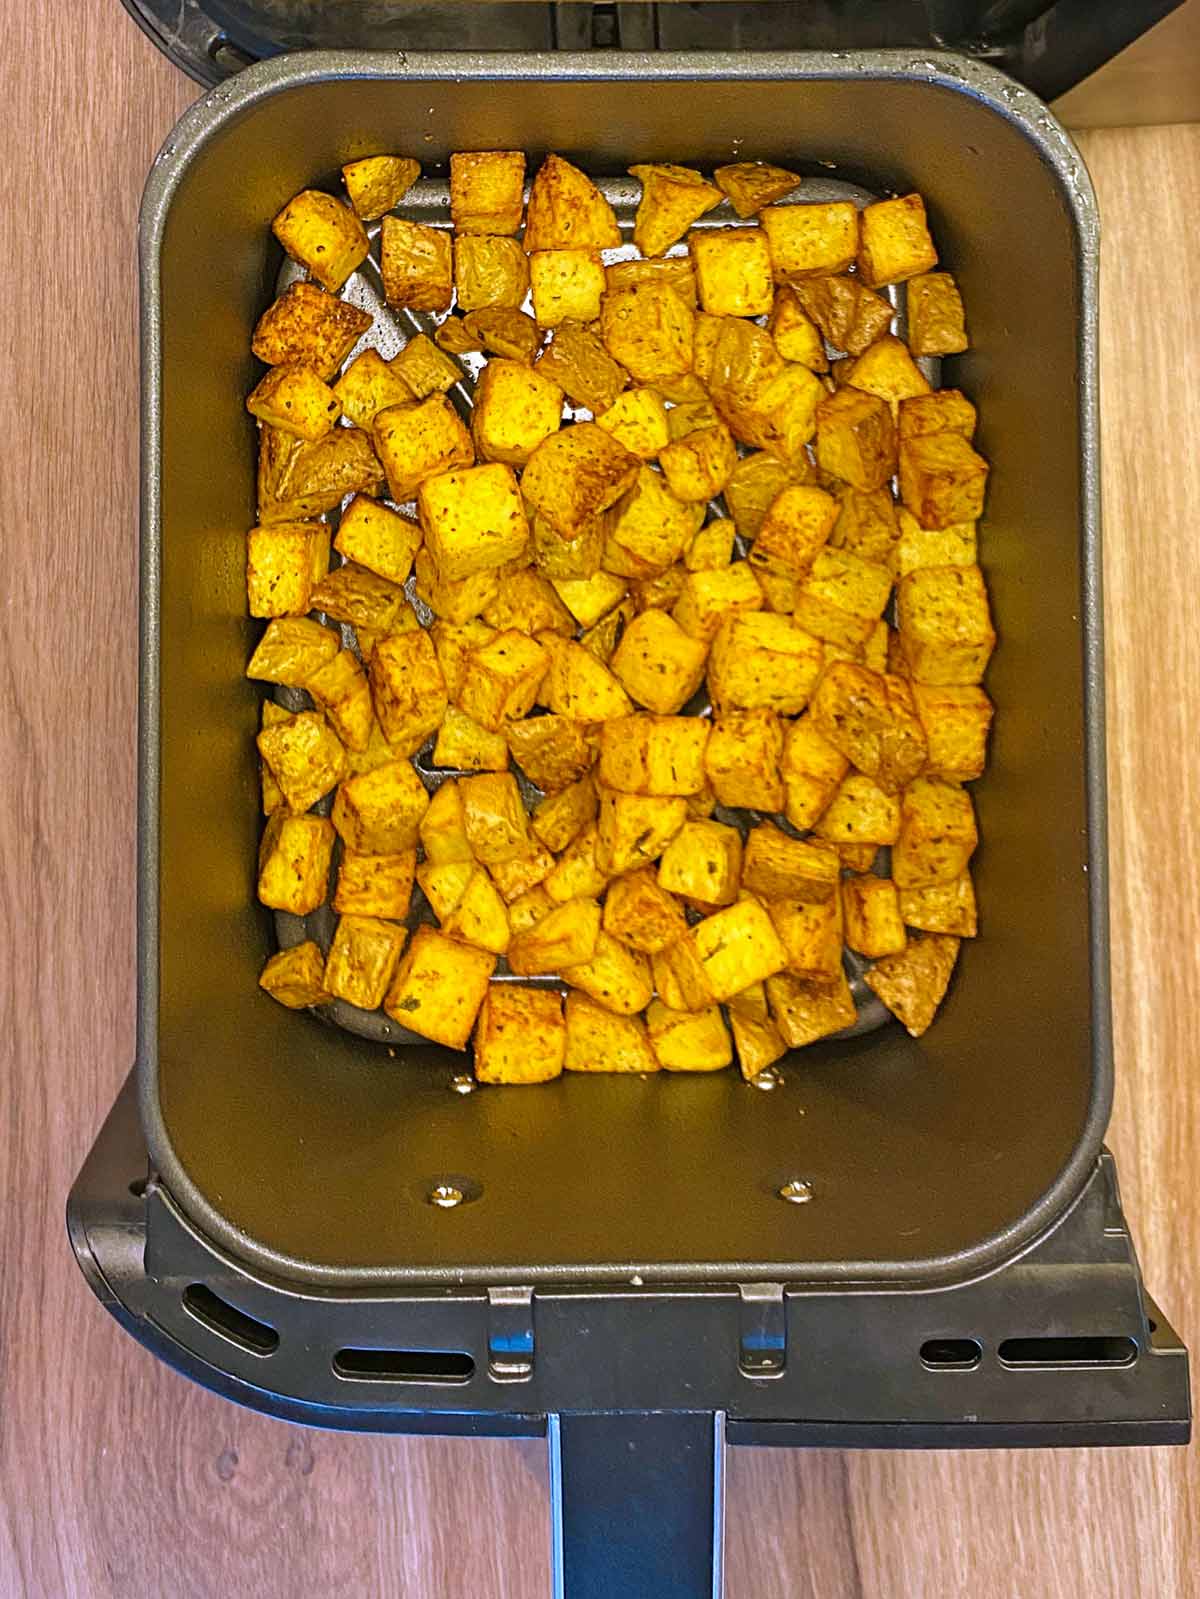 Cooked potato cubes in an air fryer.